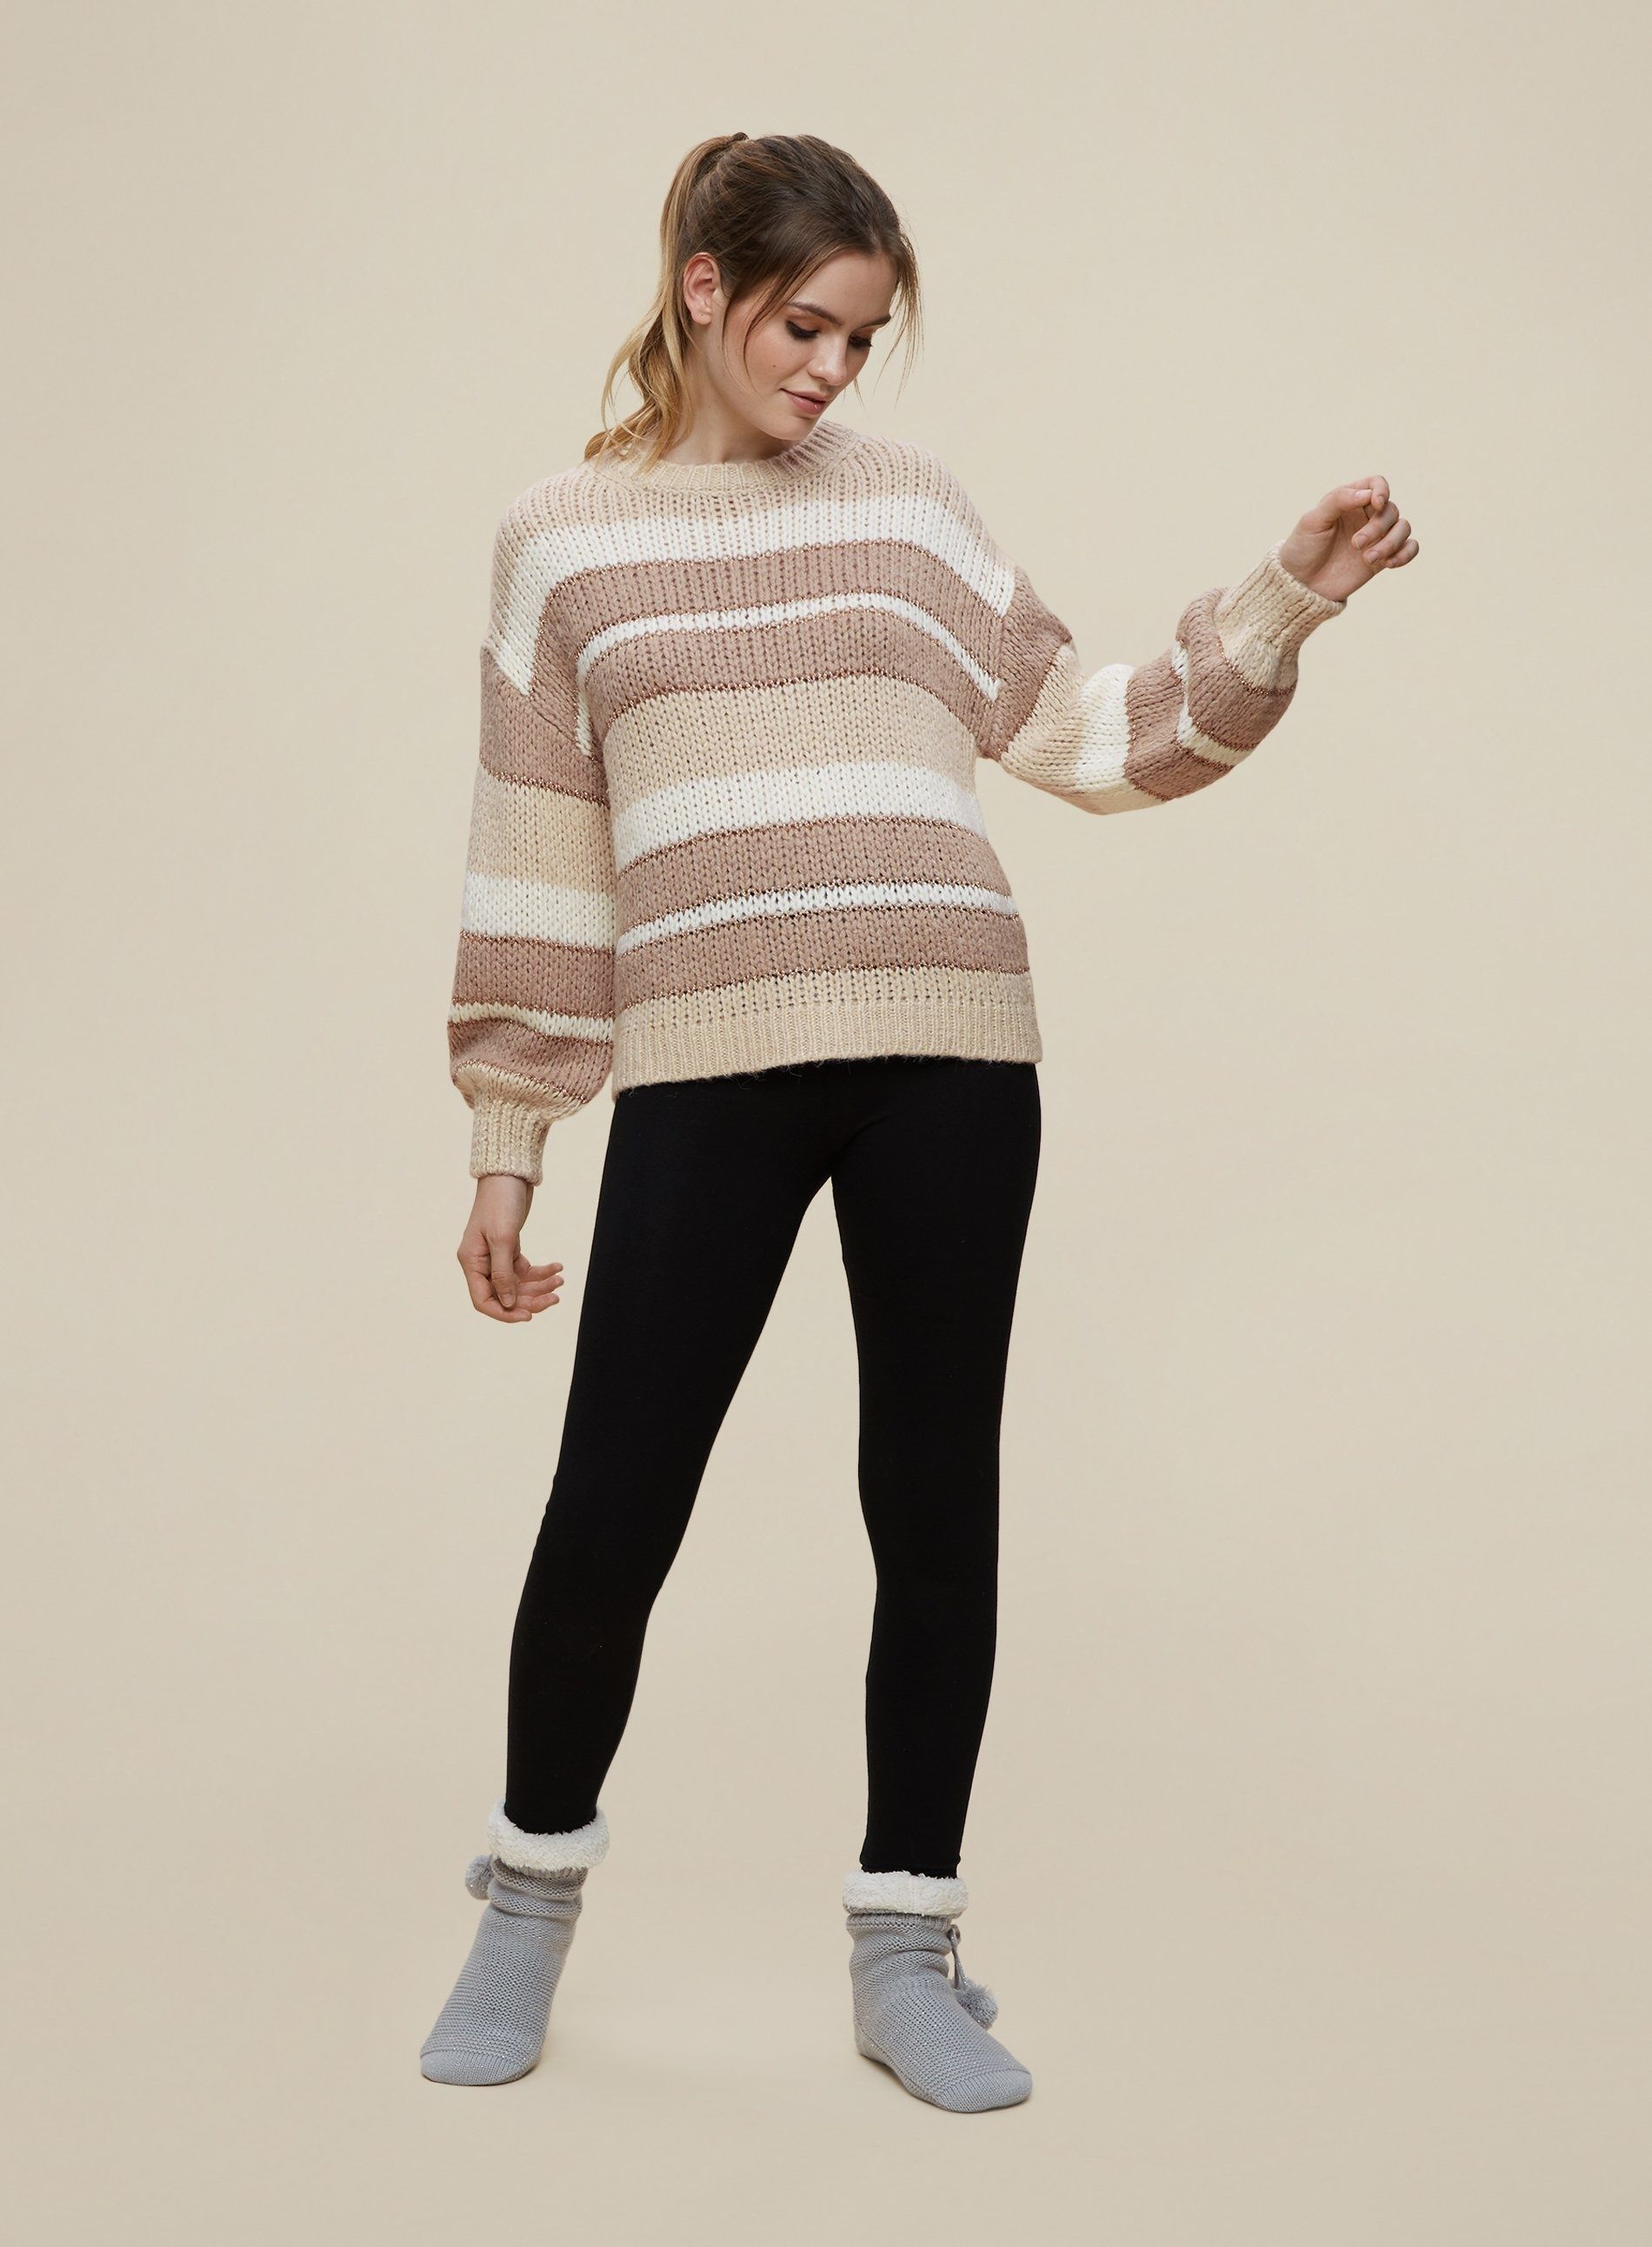 Dorothy Perkins Womens Multi Coloured Striped Jumper Sweater Pullover ...